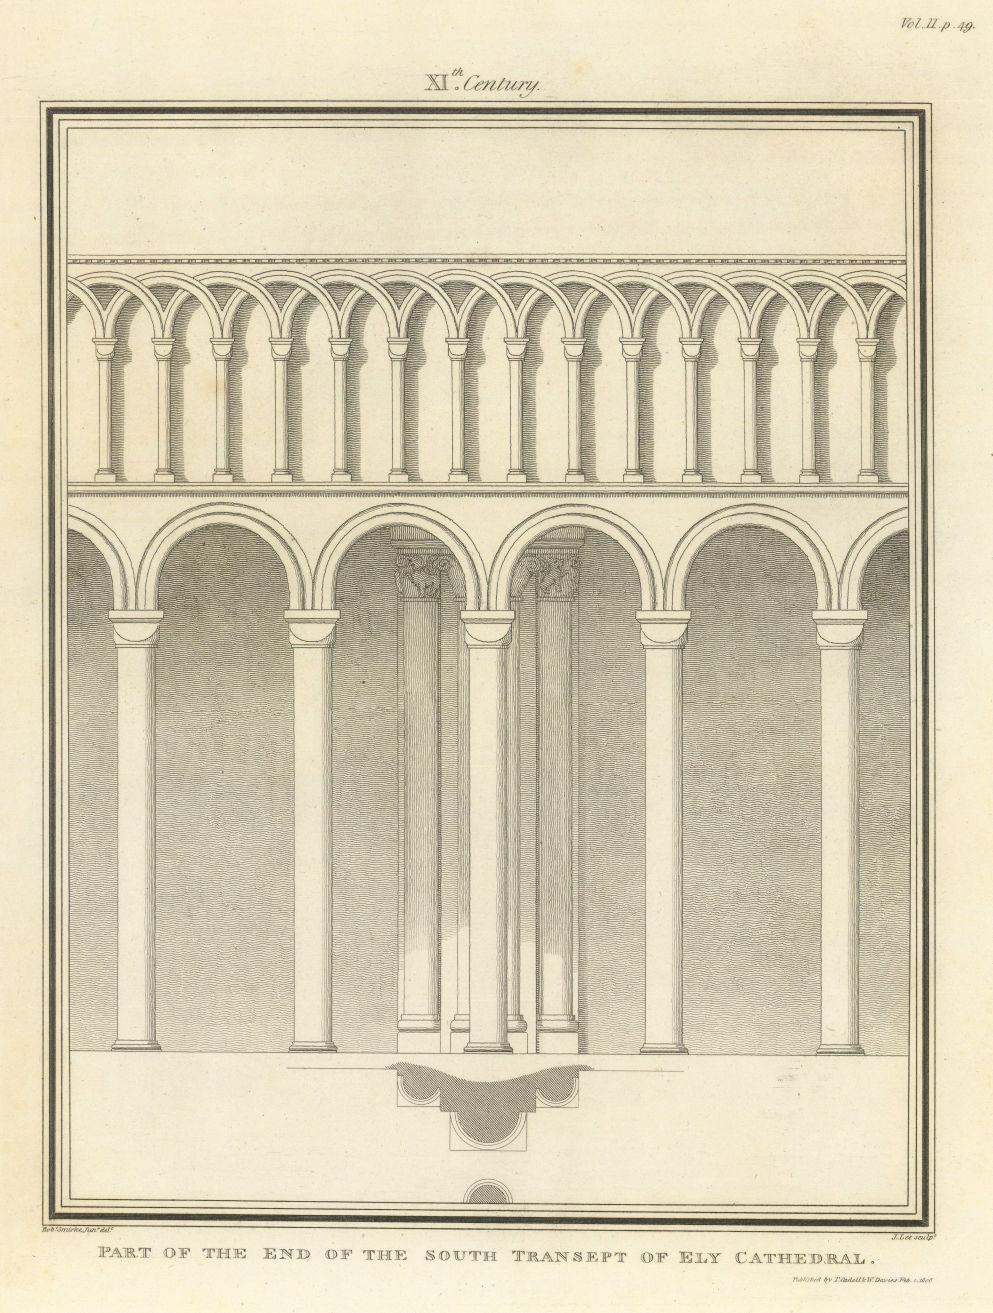 Associate Product Part of the end of the south transept of Ely Cathedral. SMIRKE 1810 old print